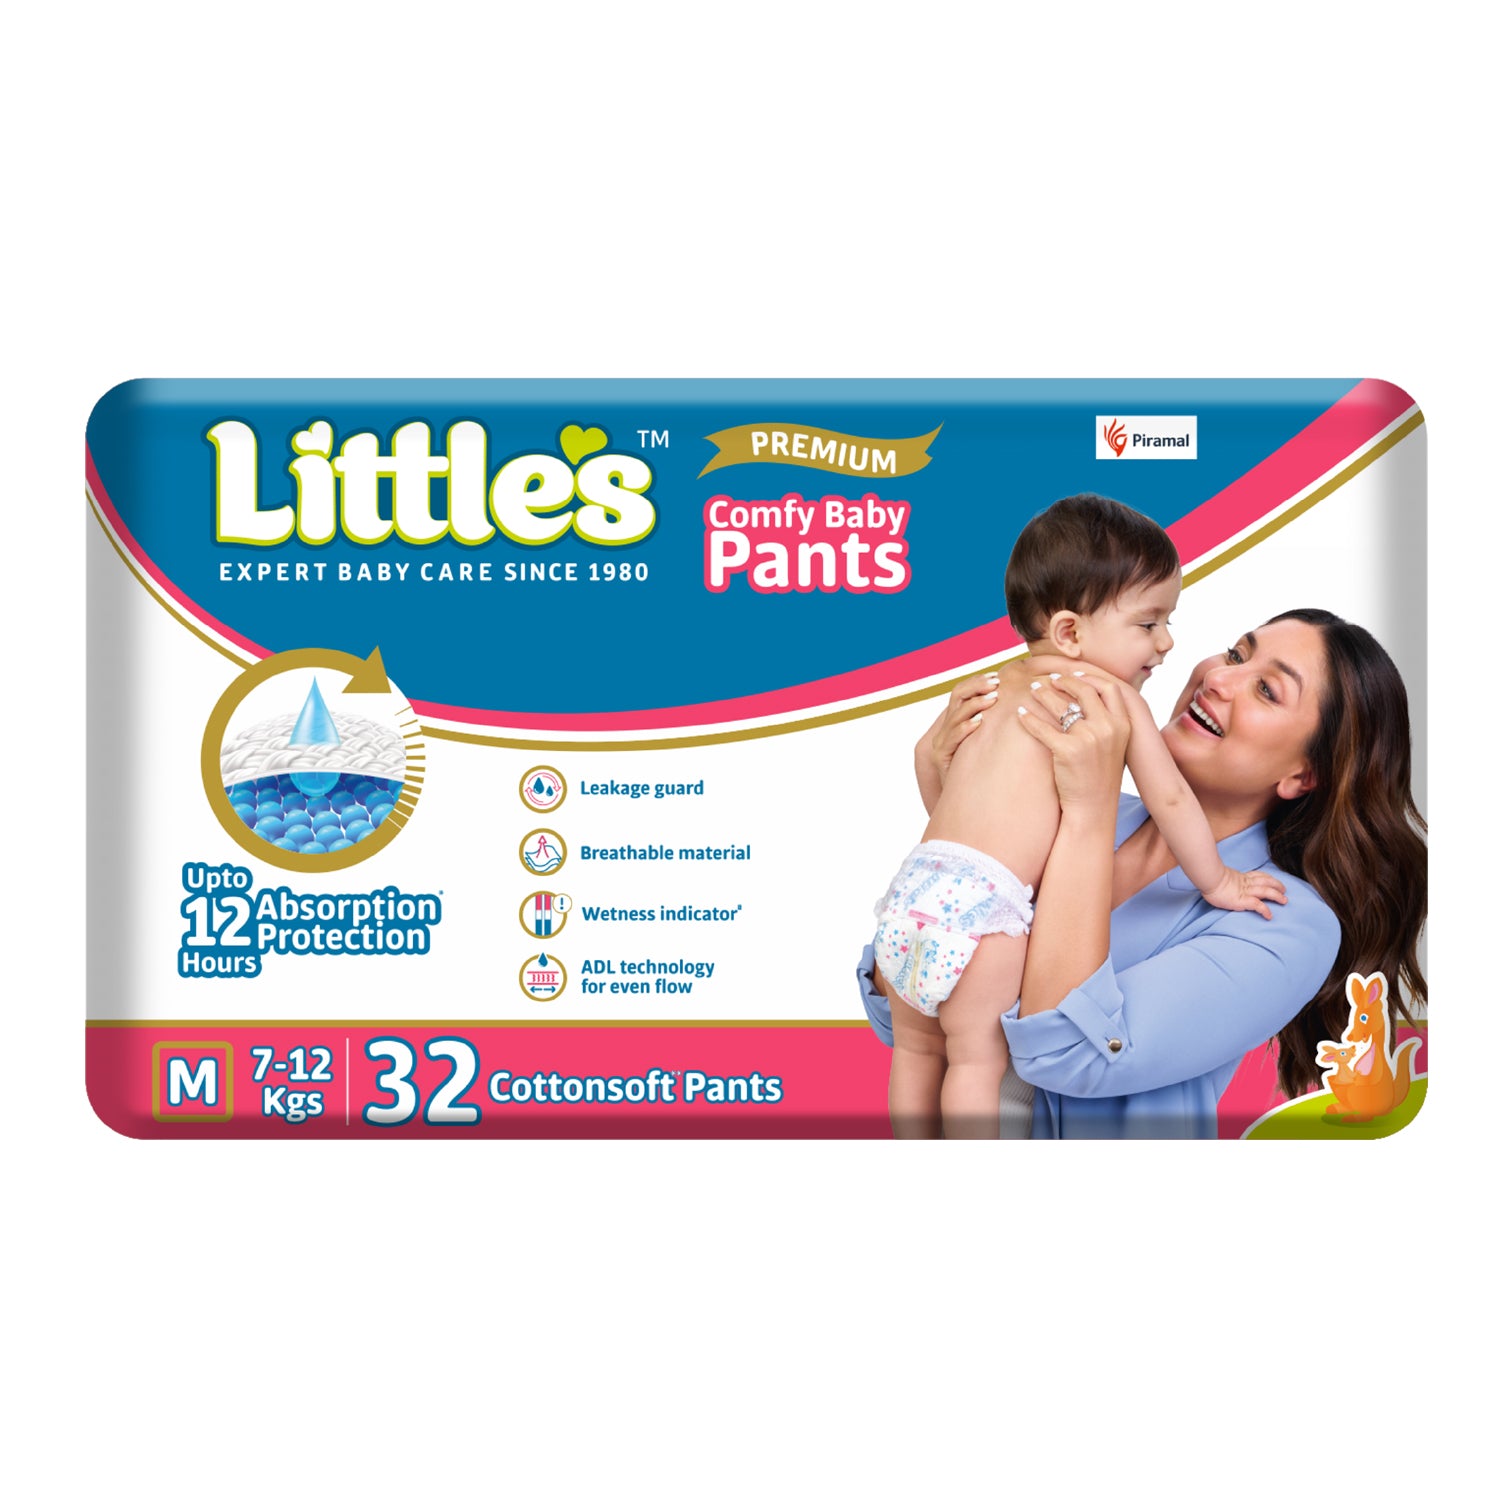 Little's Baby Pants Diapers with Wetness Indicator & 12 Hours Absorption, medium, 32 cottonsoft pants diaper